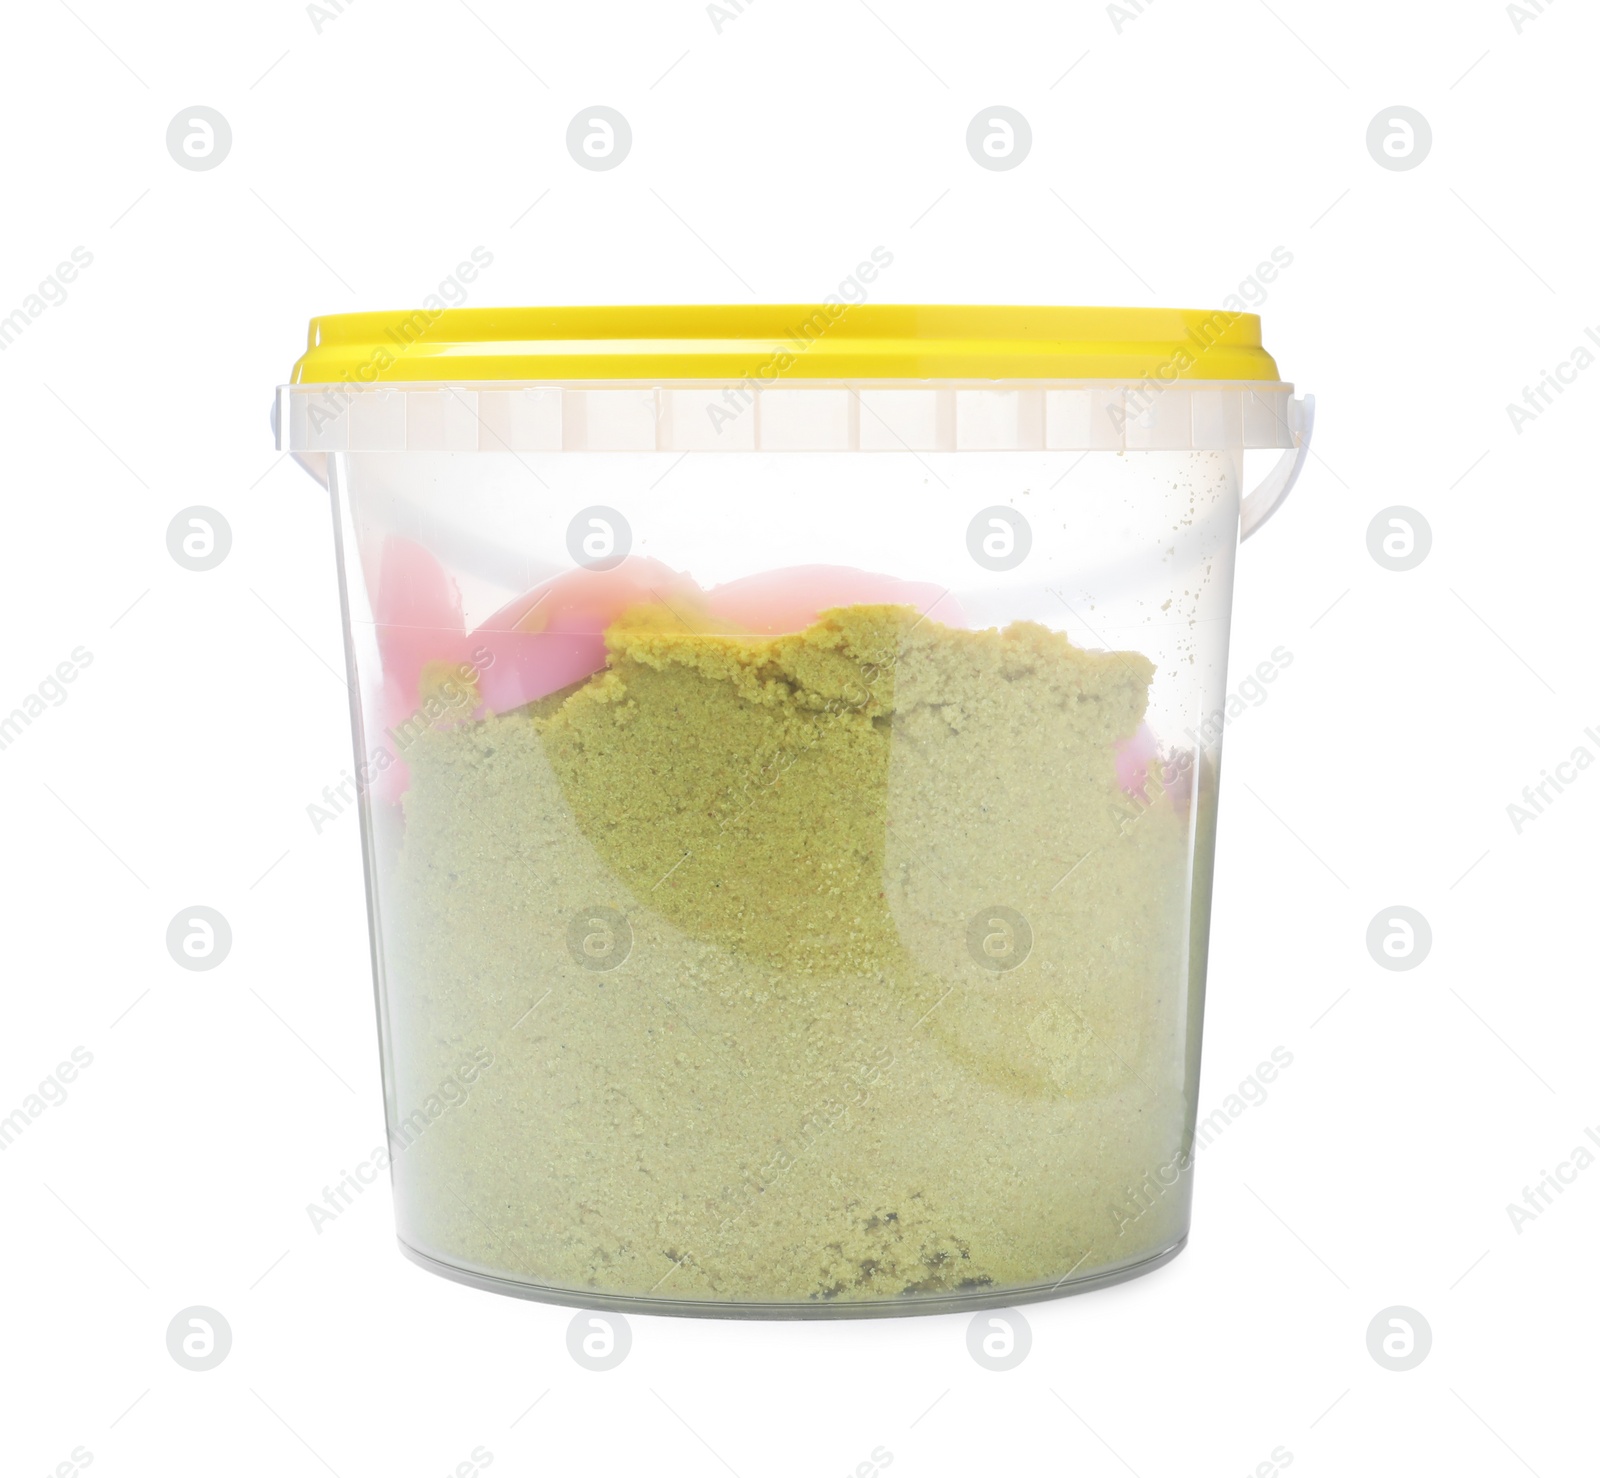 Photo of Kinetic sand and toy in bucket isolated on white